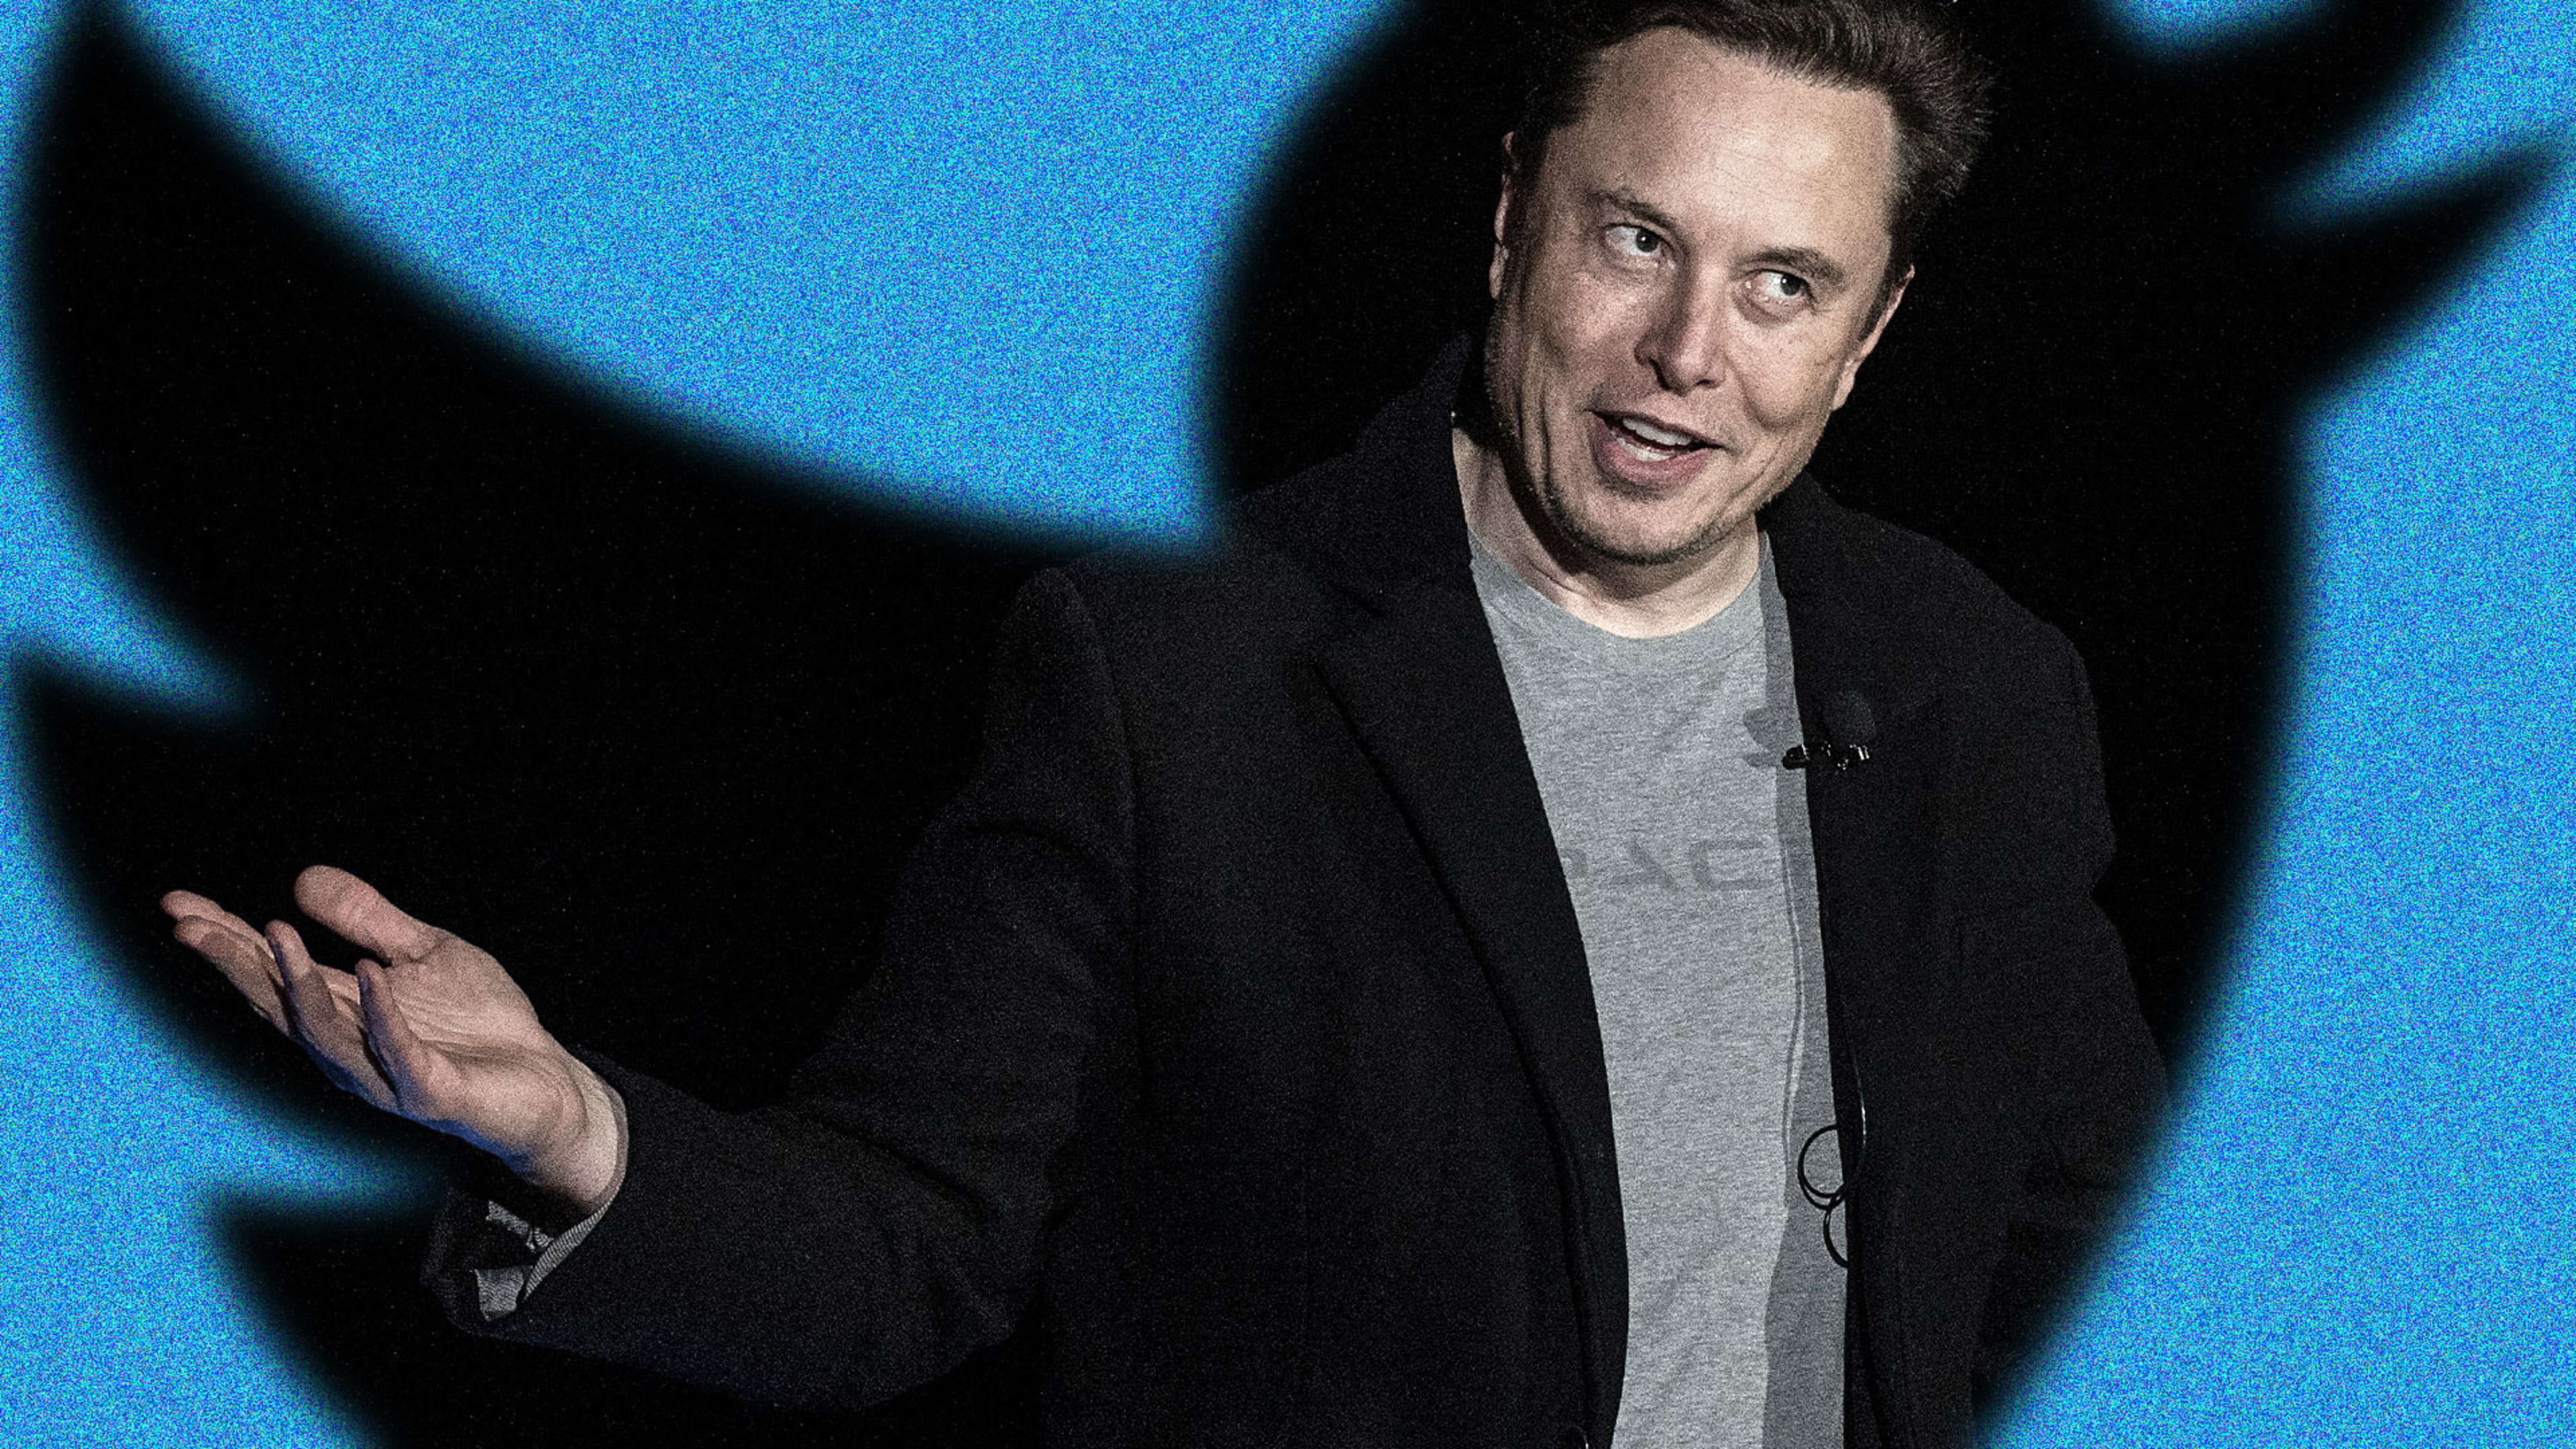 There’s reason to be skeptical of Elon Musk’s Twitter polls